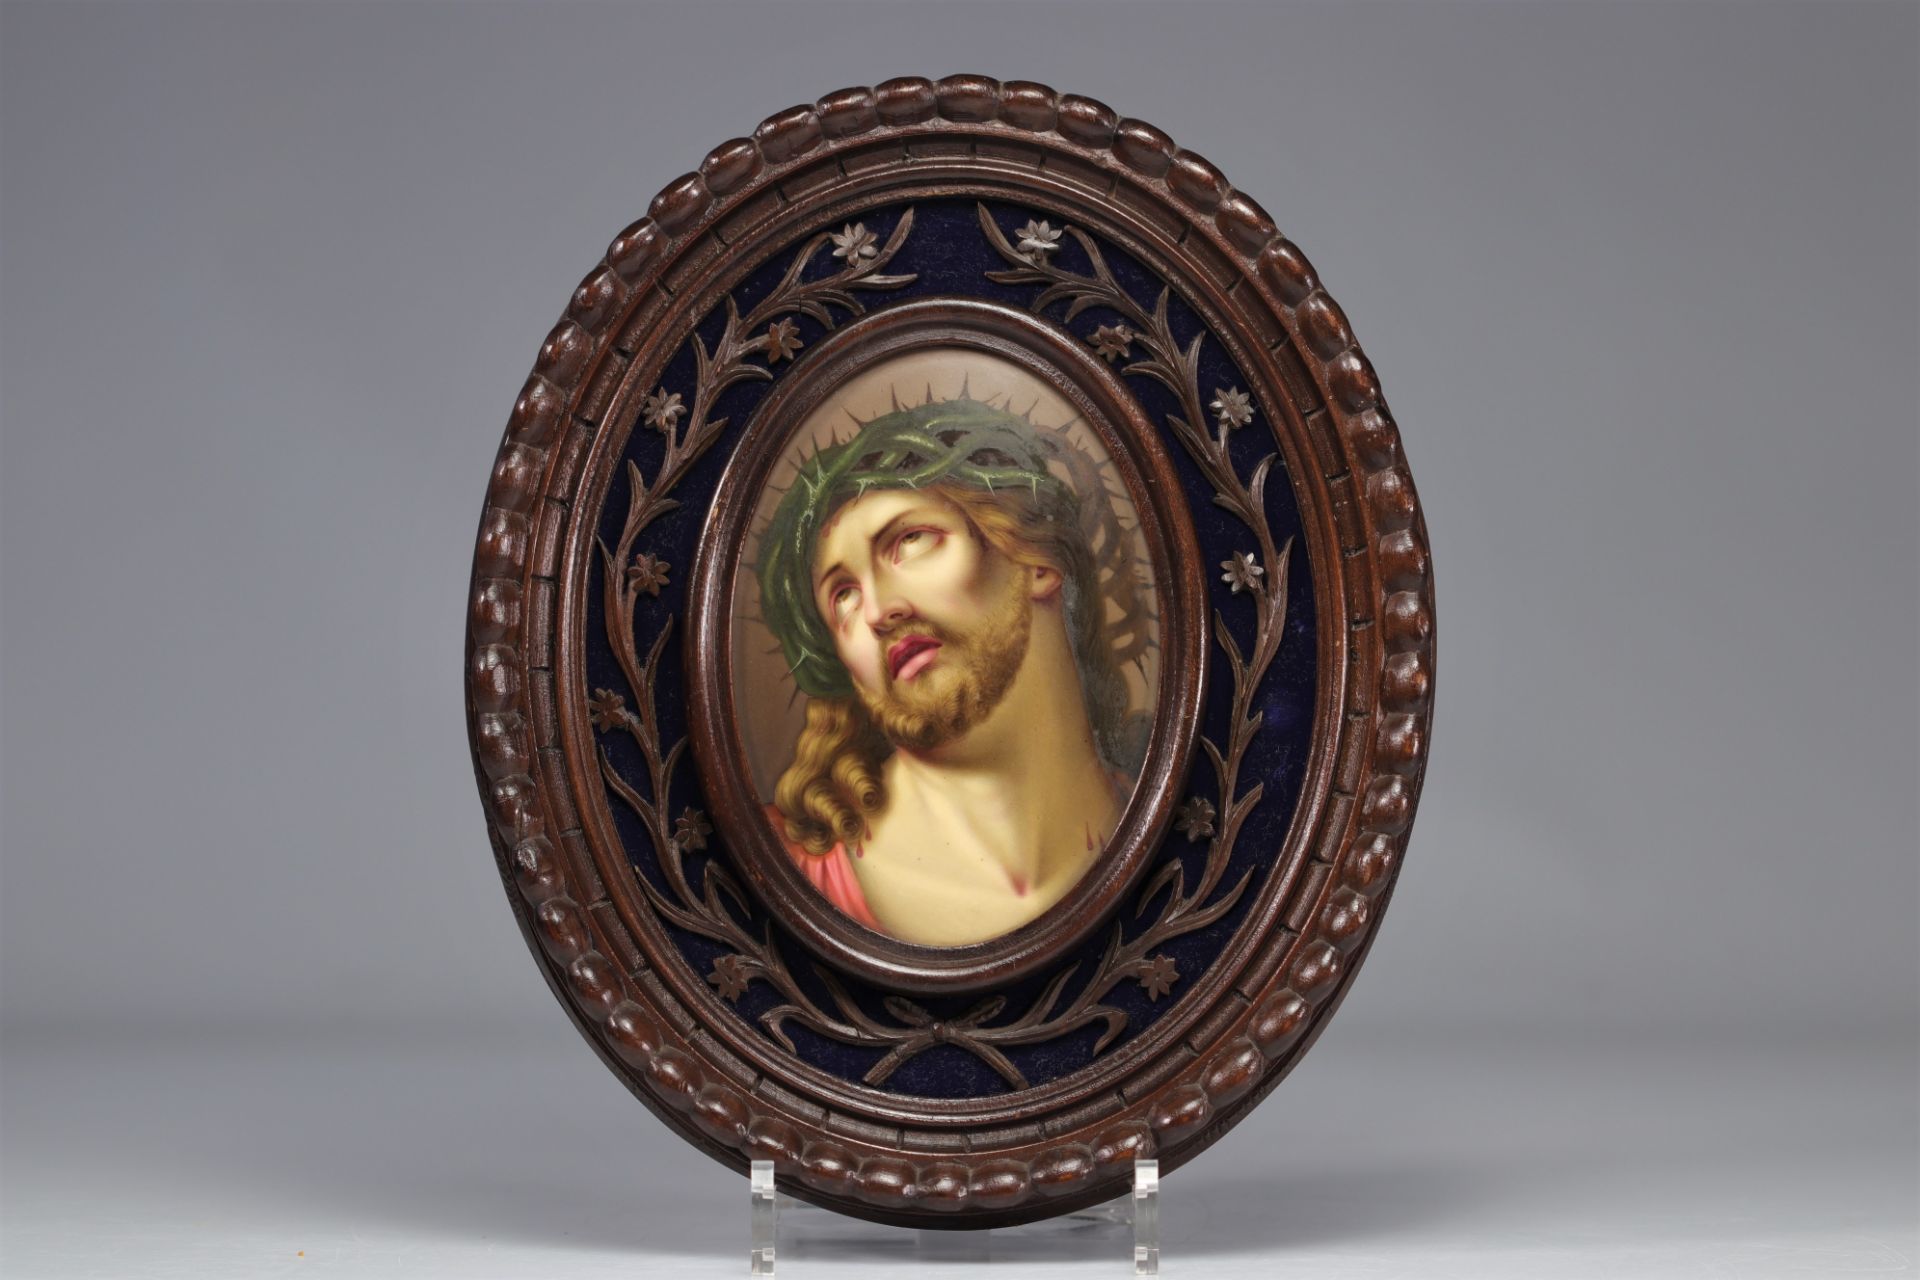 Painting on porcelain head of Christ in a wooden frame in the KPM style